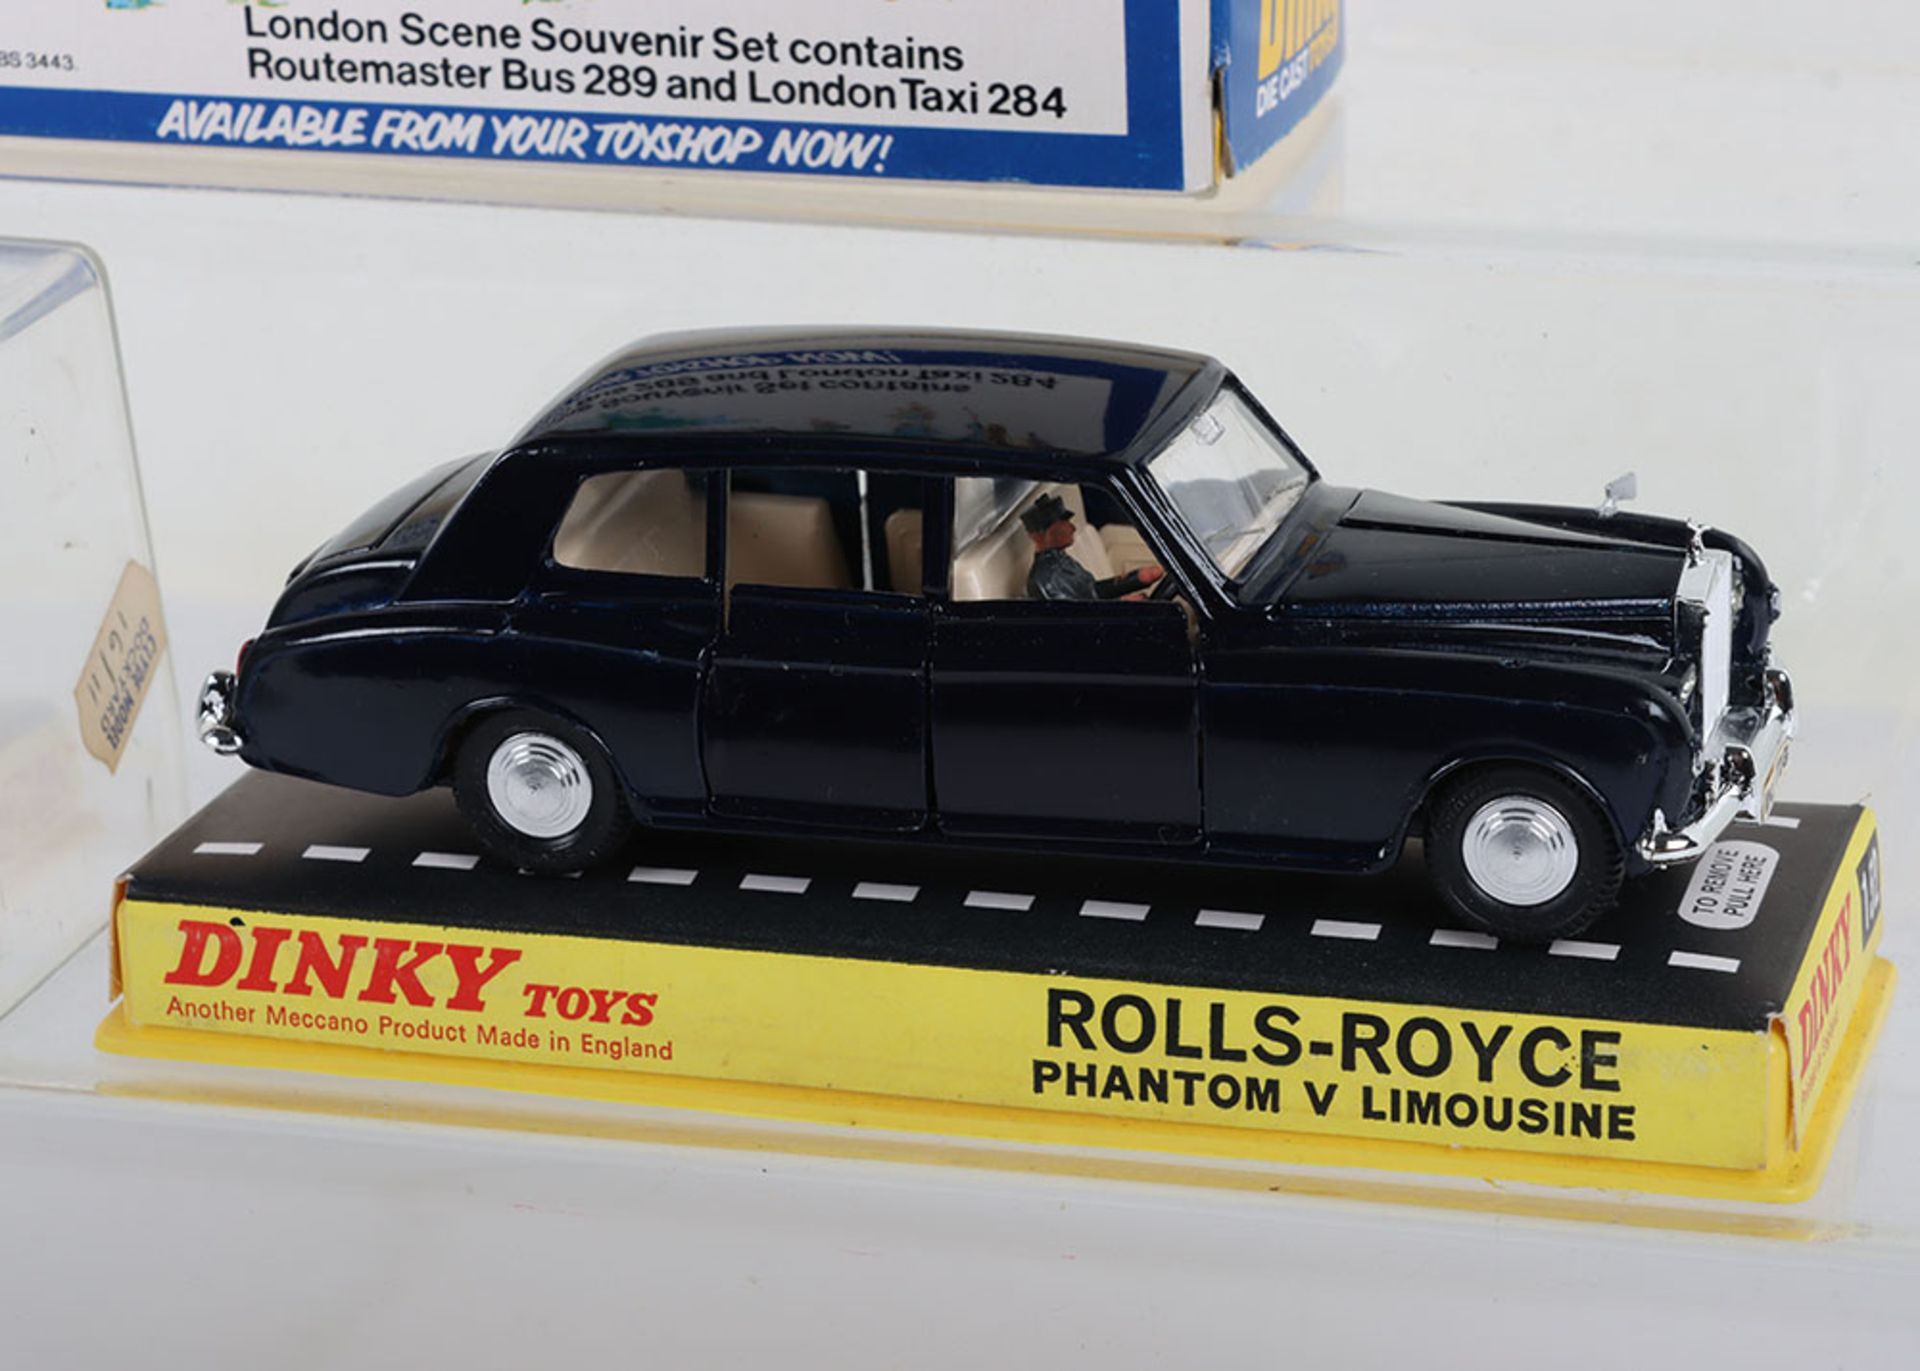 Two Dinky Toys Rolls Royce Phantom V Limousines - Image 4 of 6